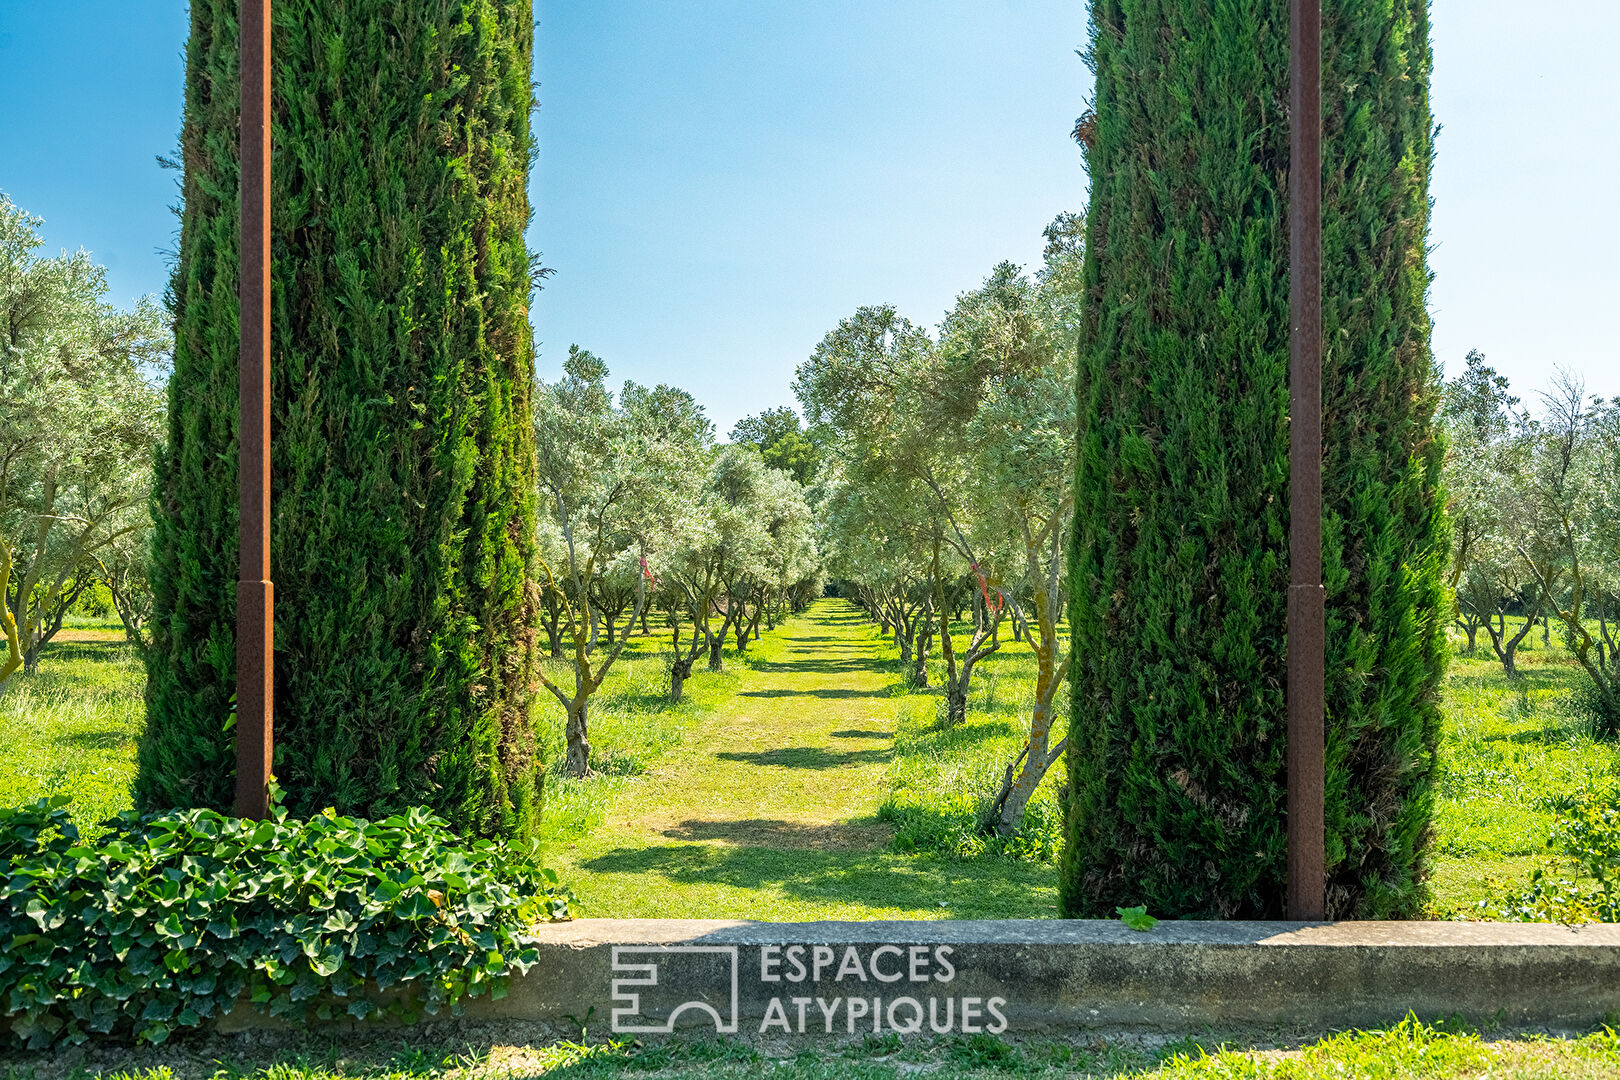 Provencal house and its olive grove